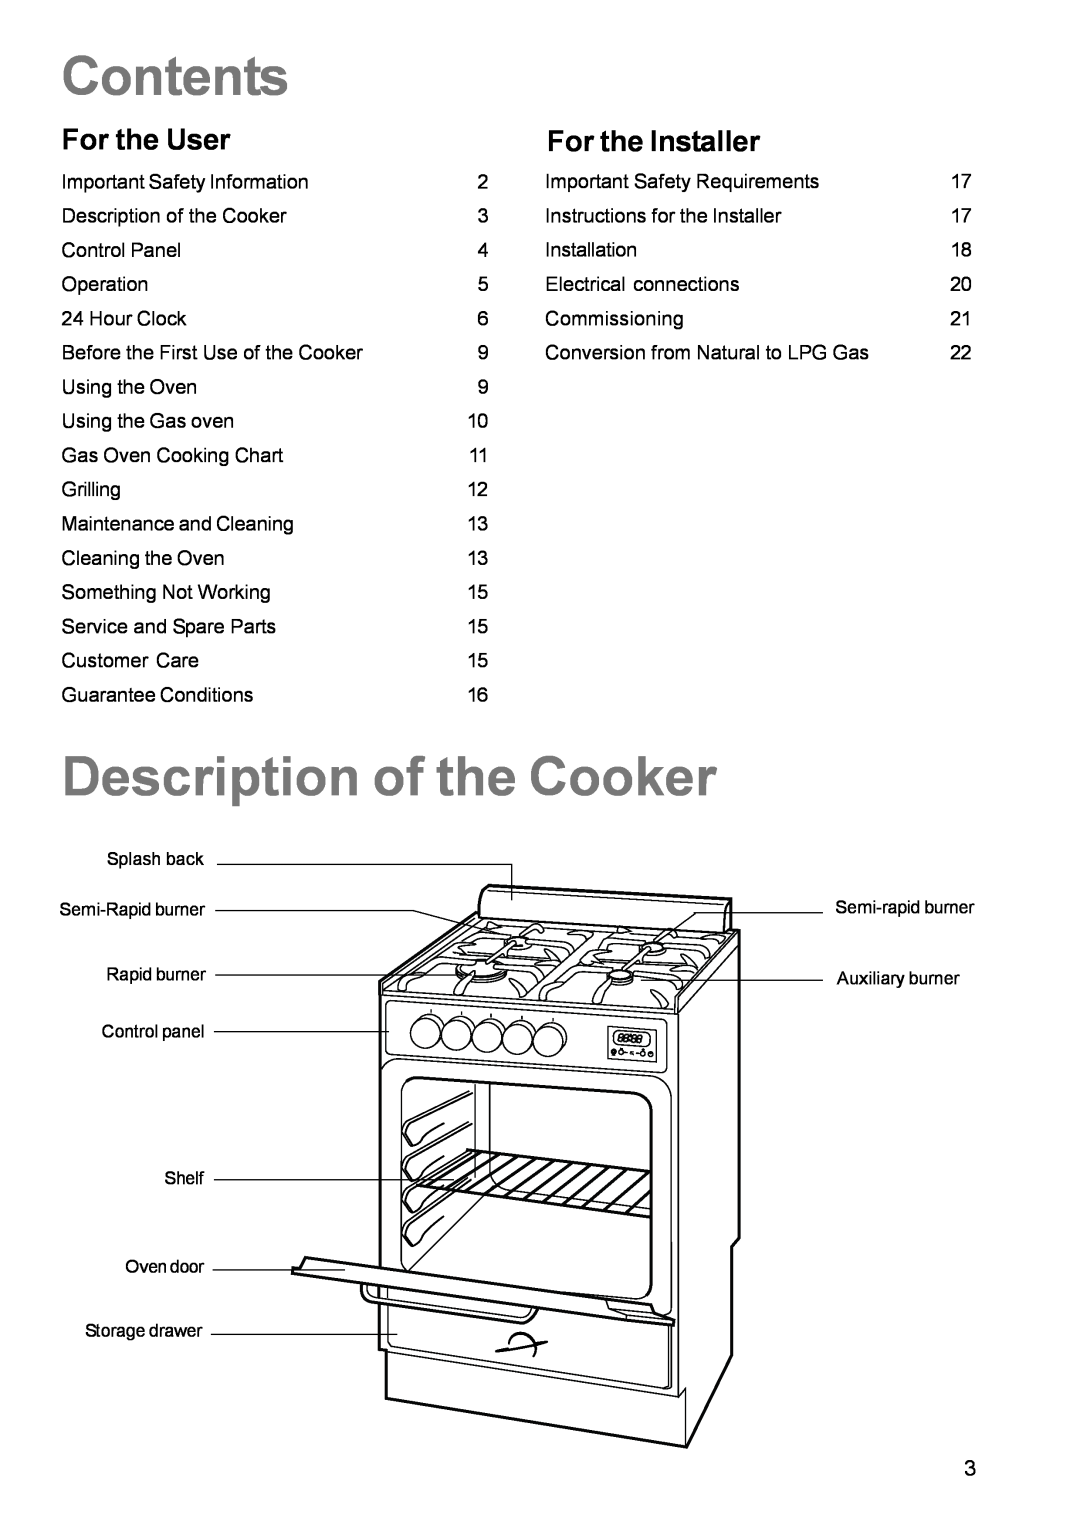 Zanussi ZCG 611 manual Contents, Description of the Cooker, For the User, For the Installer 